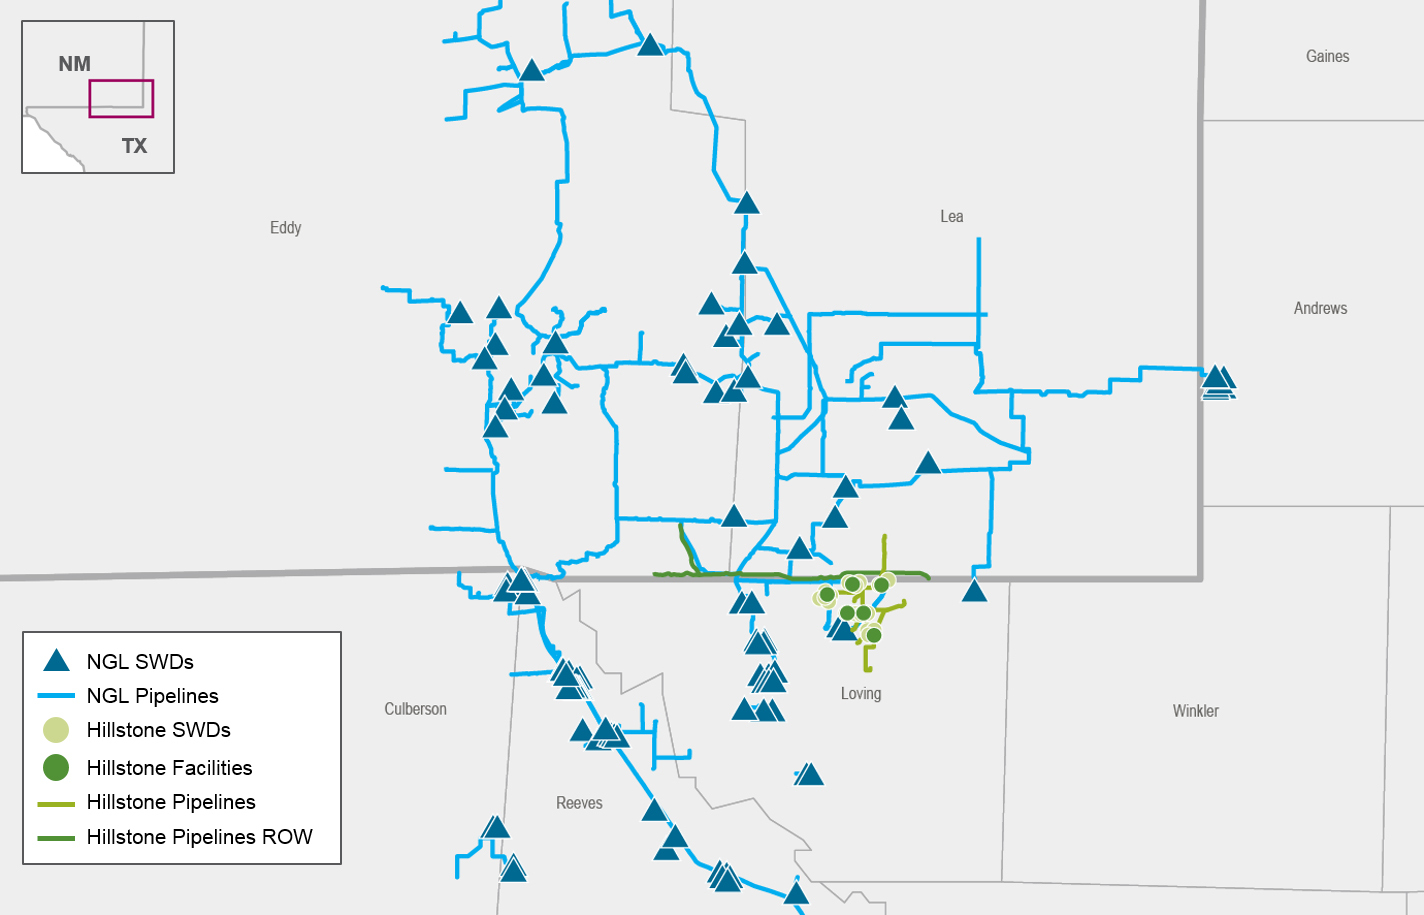 NGL Energy Partners Pro Forma Northern Delaware Basin Asset Map includes existing assets, assets under construction, pipelines and pipeline rights of way. (Source: Business Wire)